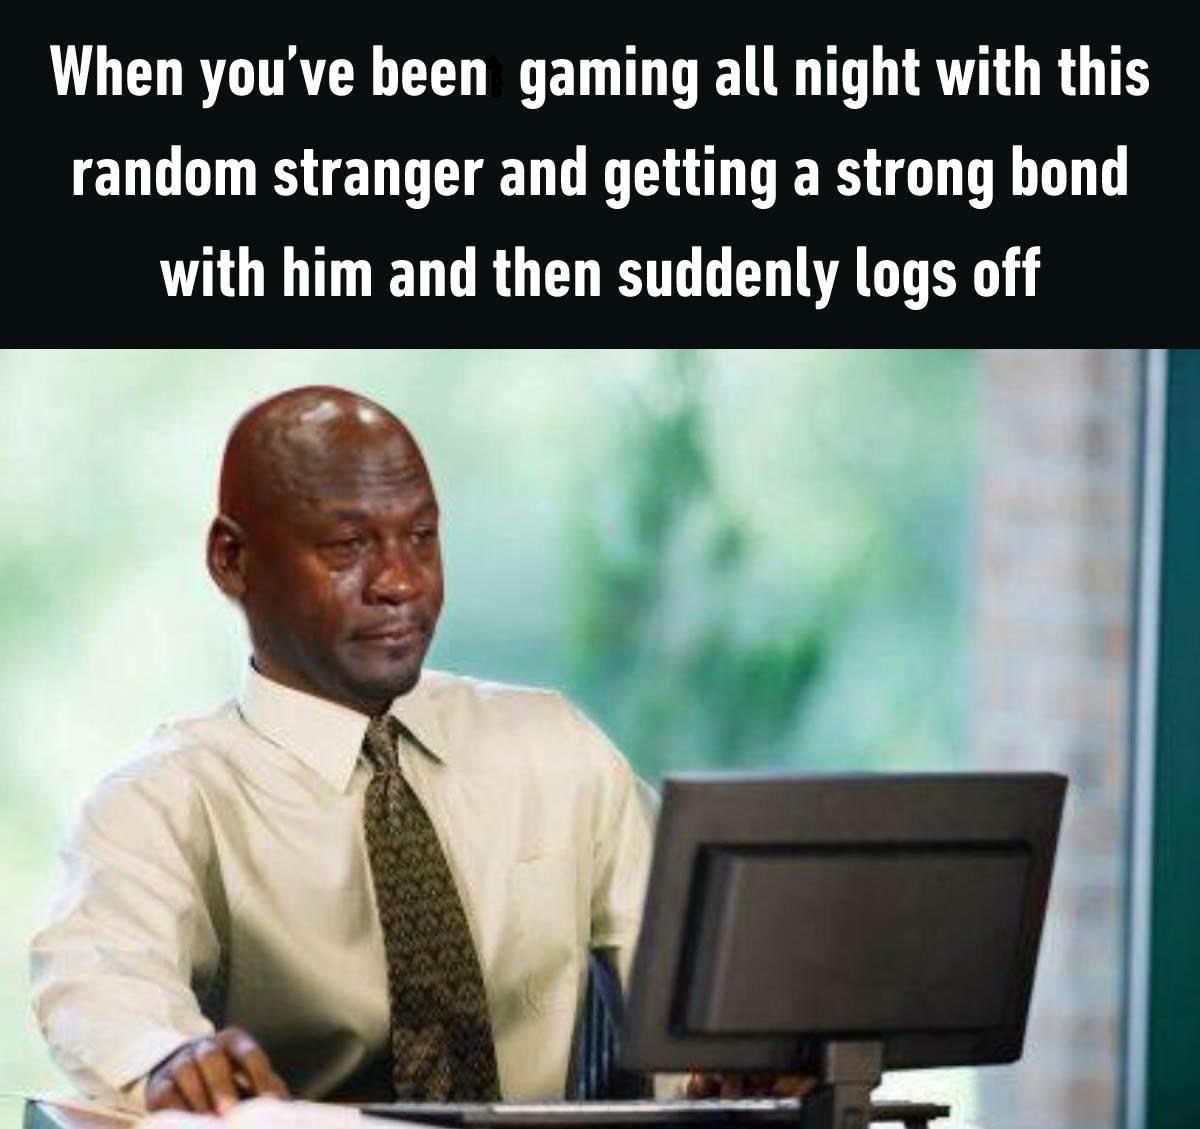 gaming meme - When you've been gaming all night with this random stranger and getting a strong bond with him and then suddenly logs off